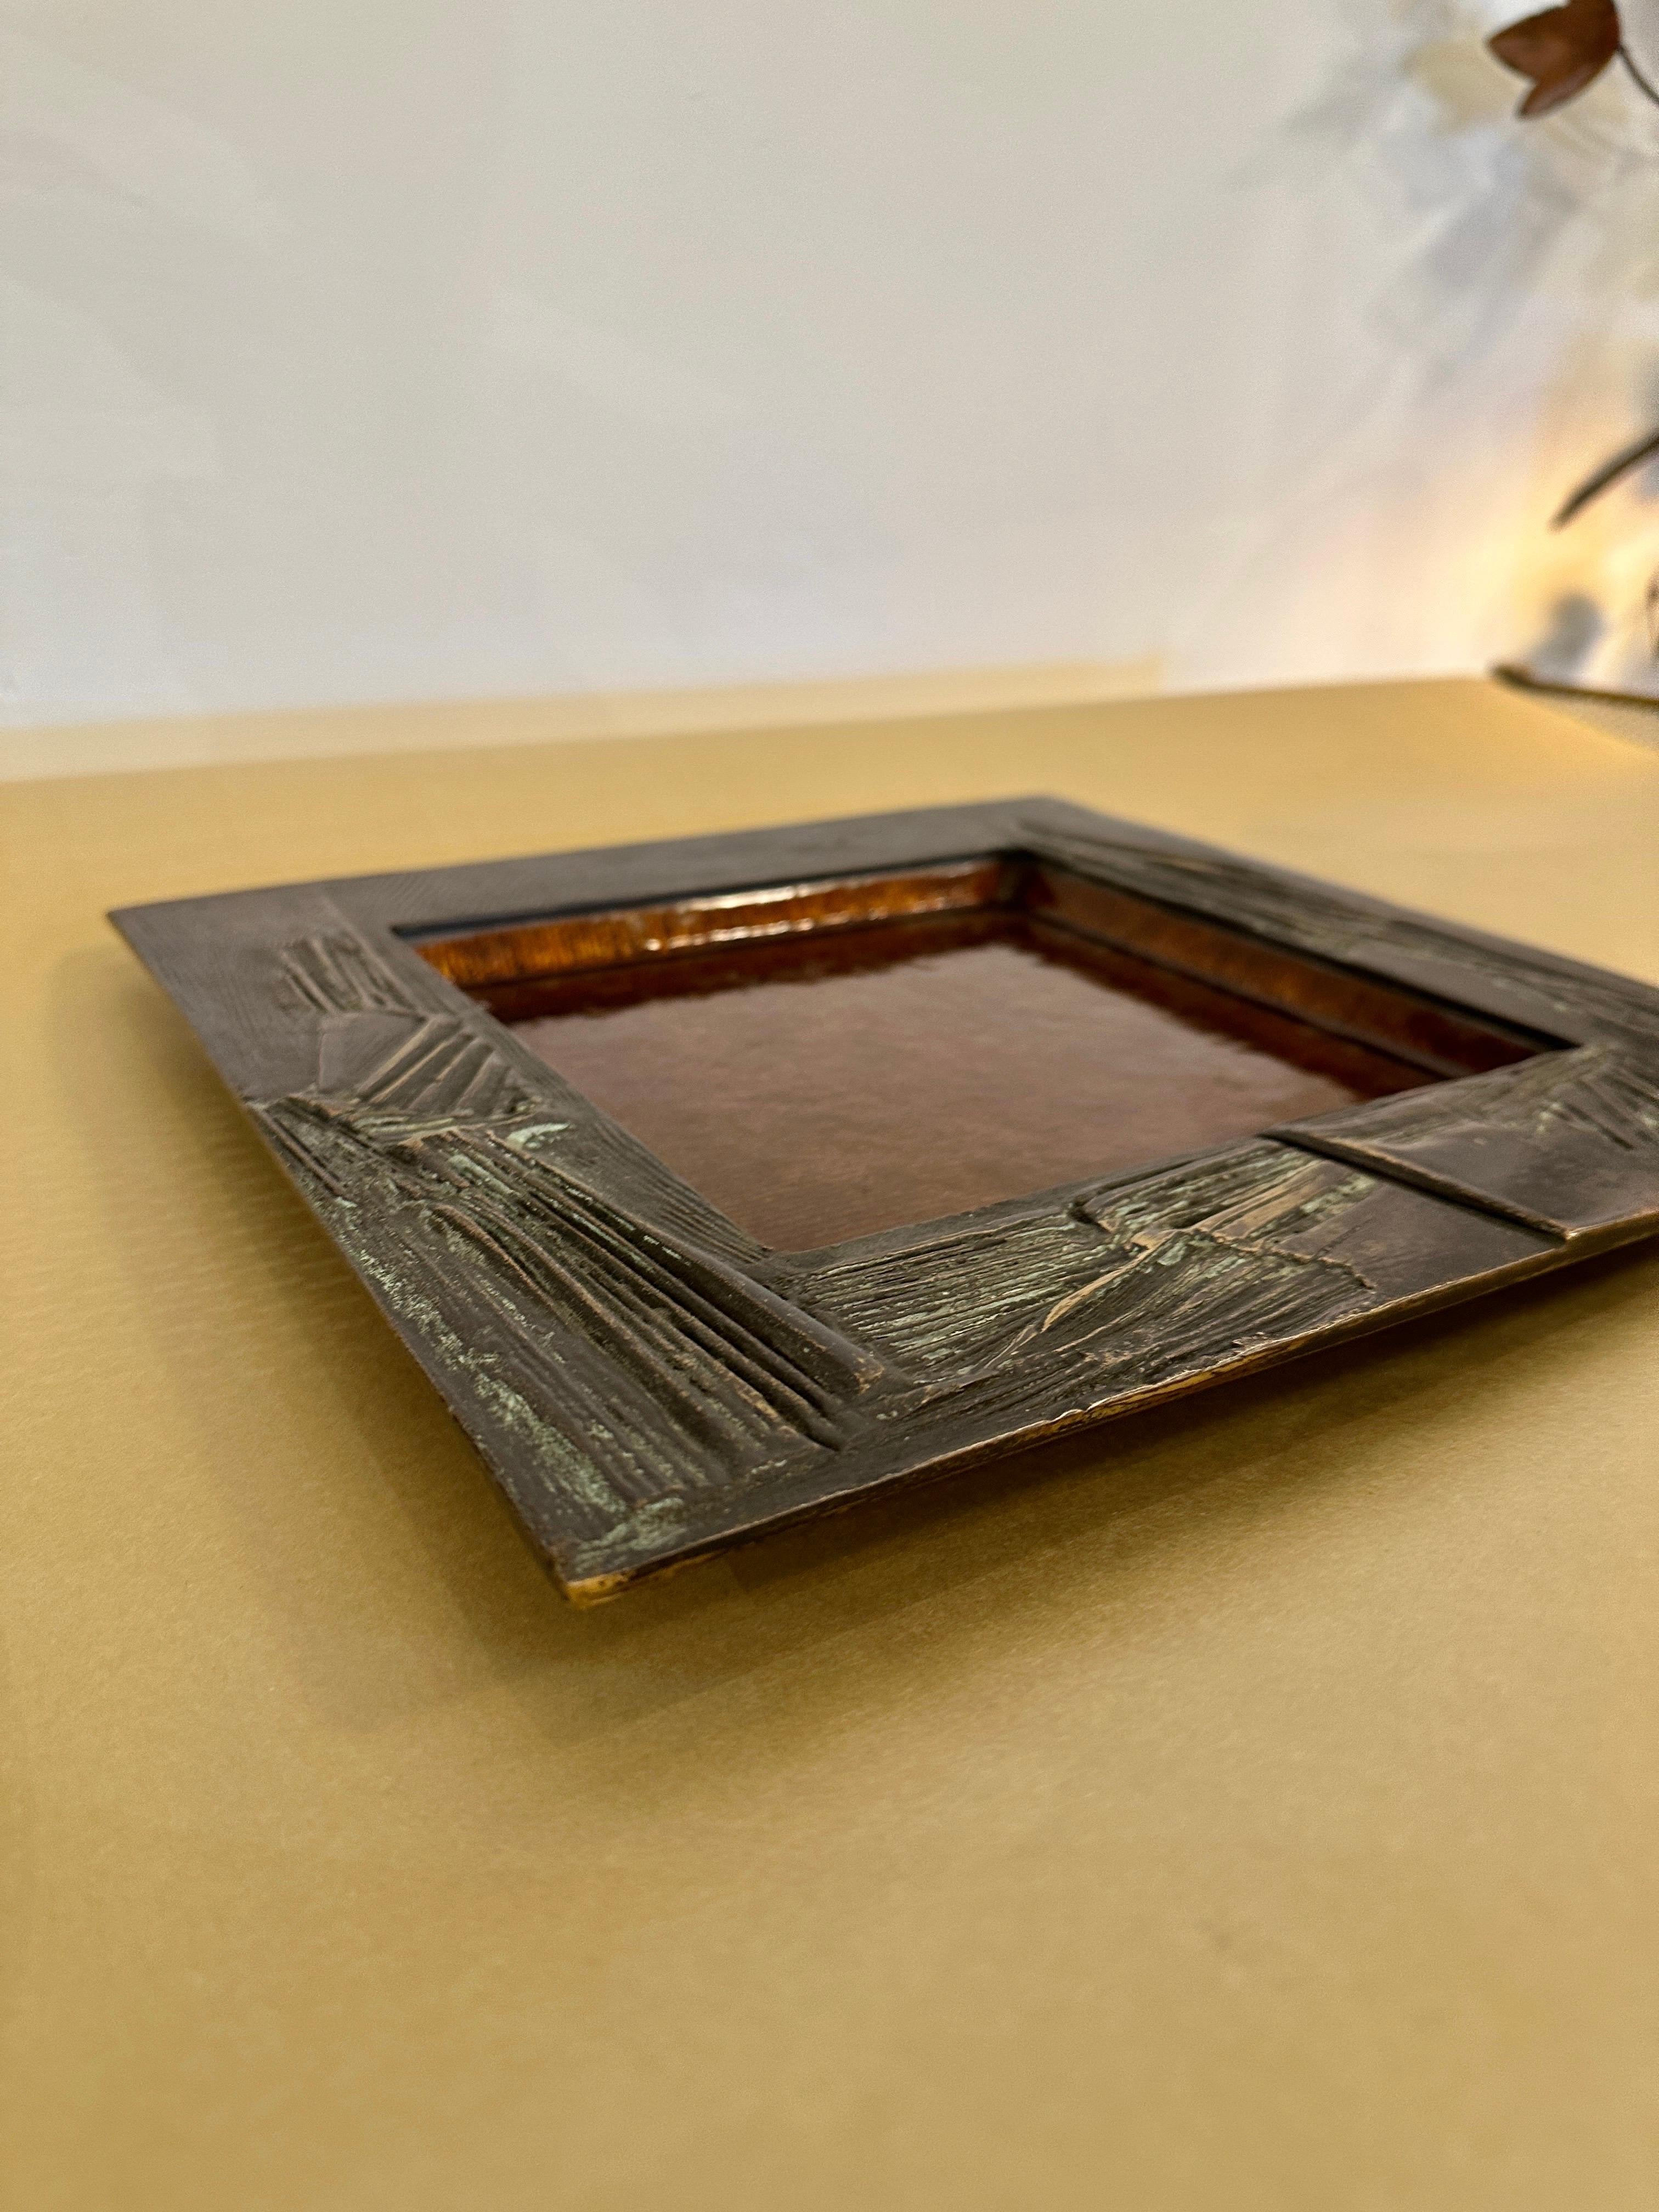 Mid-20th Century Bronze Modernist Large Square Bowl Sculpture, Signed Del Campo - Italy For Sale